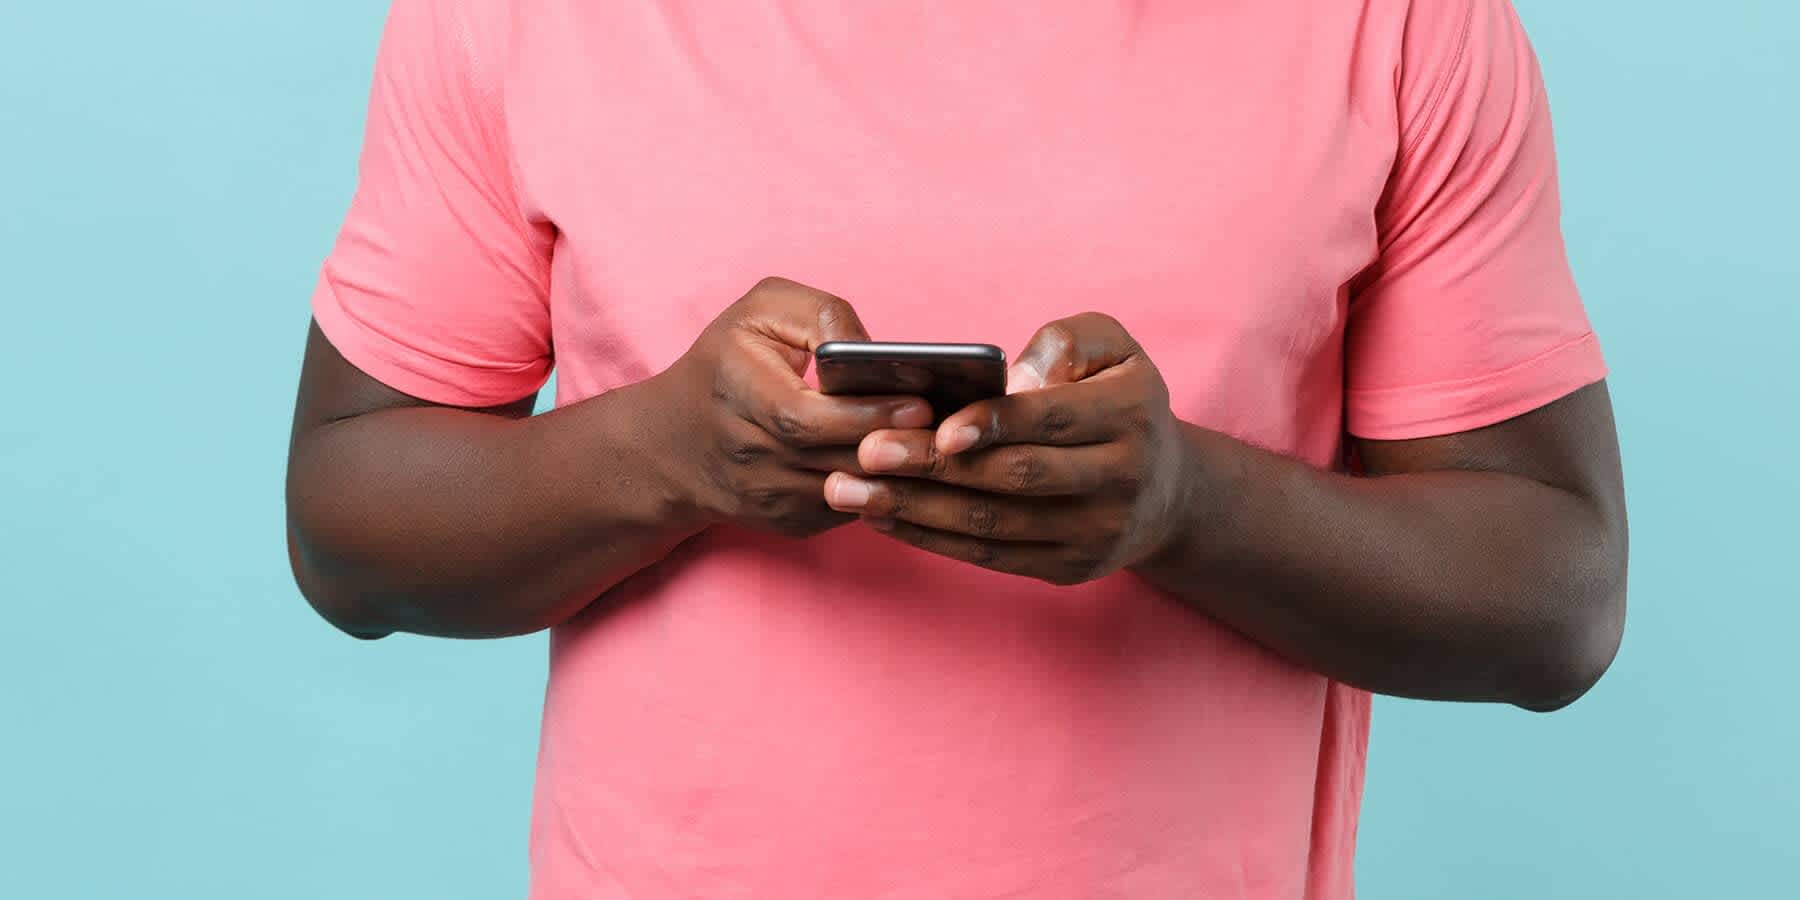 Man in pink shirt using mobile phone to research silent celiac disease